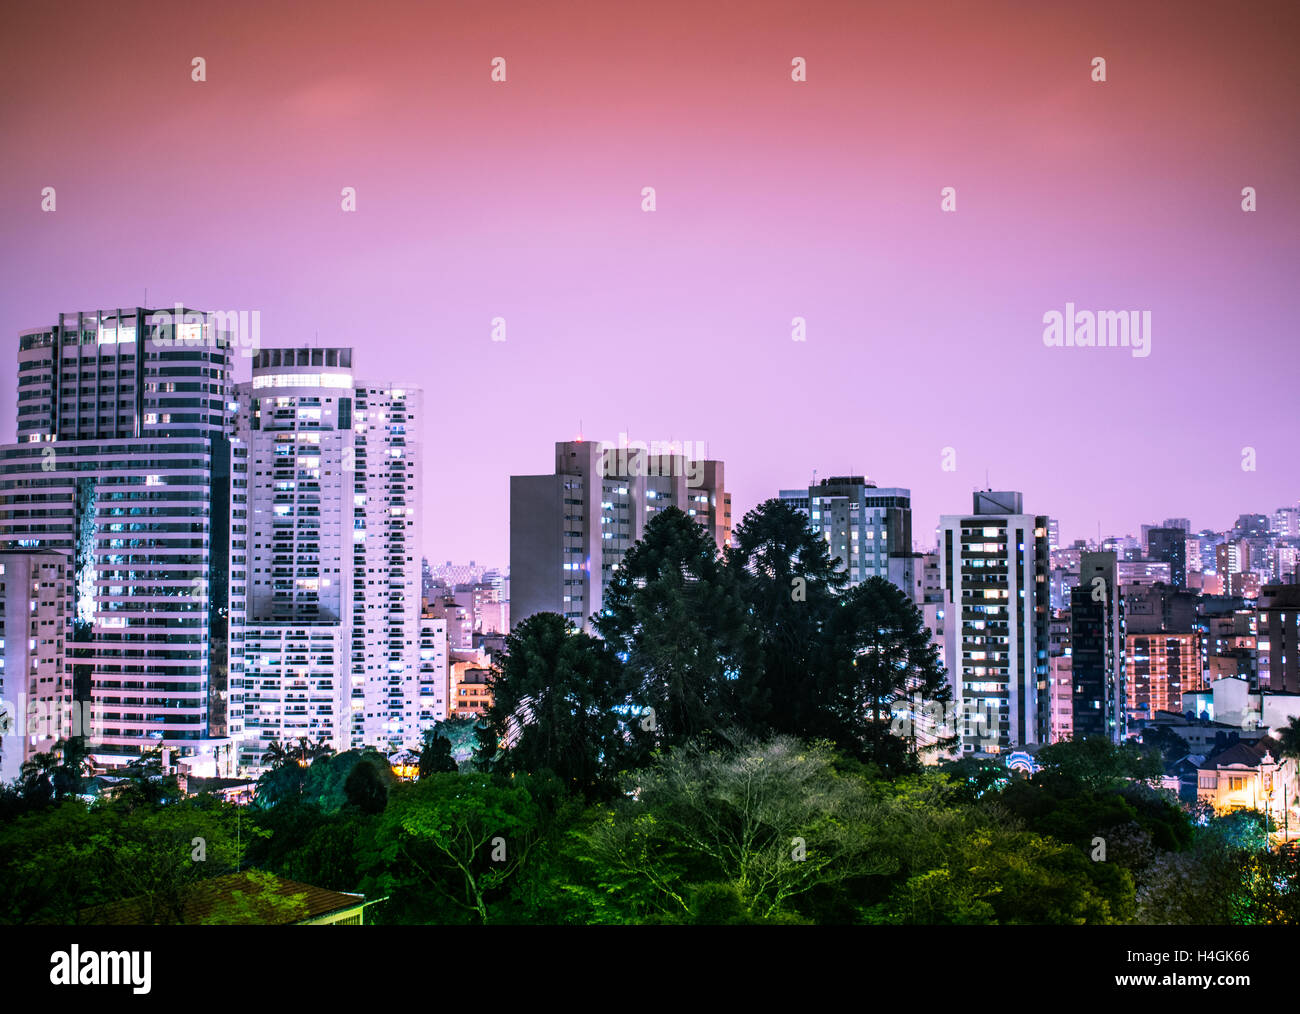 A landscape view of buildings at São Paulo, Brazil Stock Photo